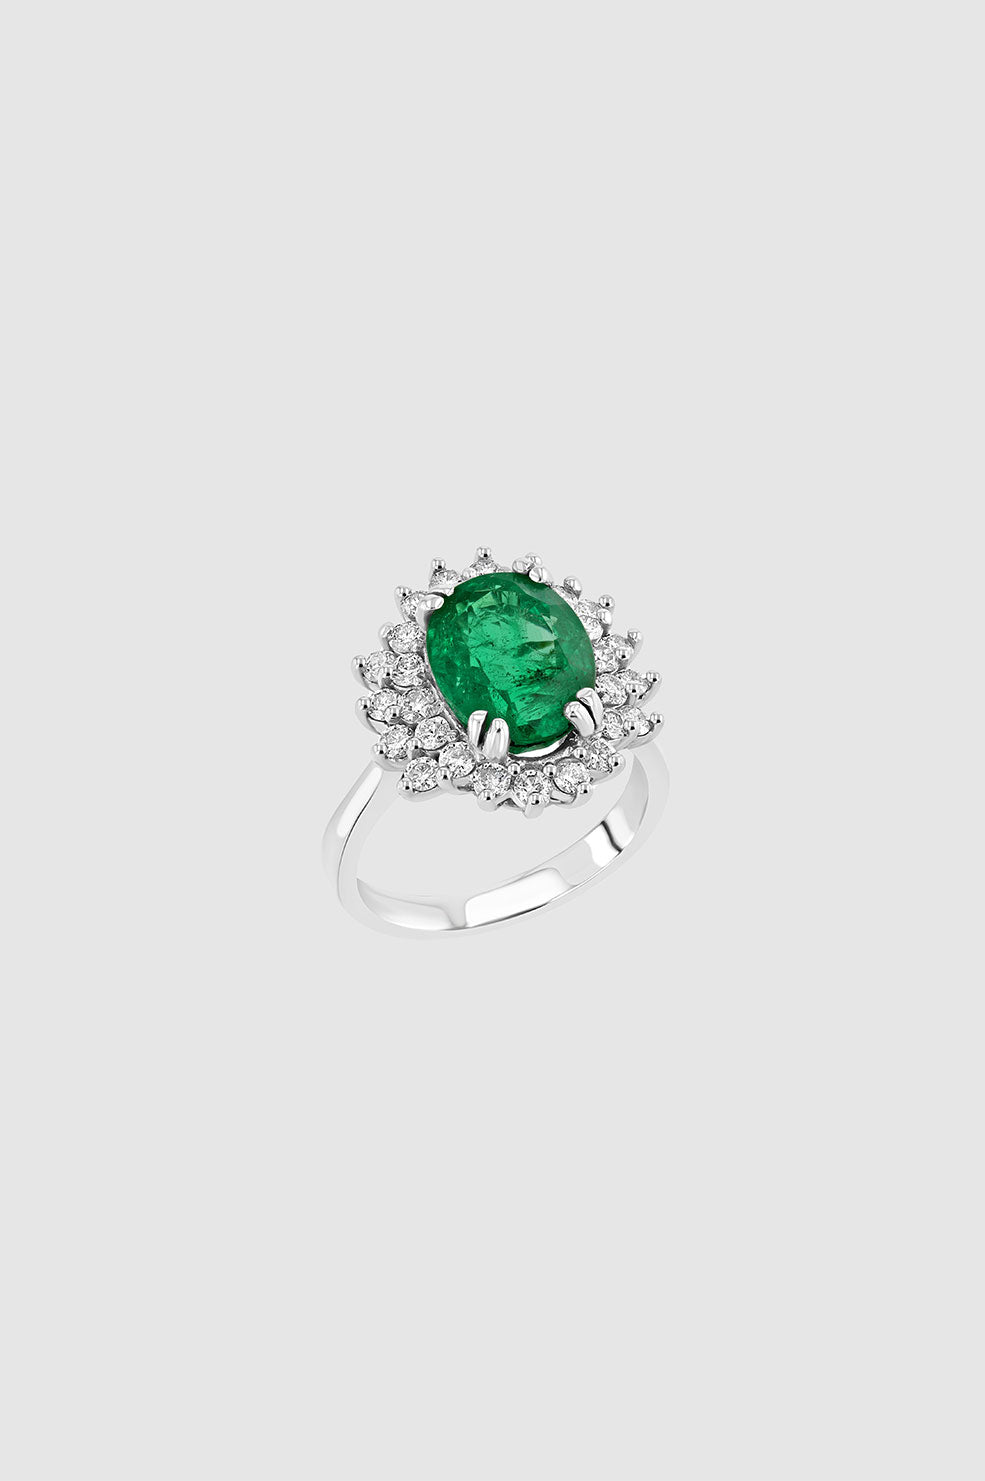 ANINE BING Oval Cut Emerald Ring - 14k White Gold - Top View